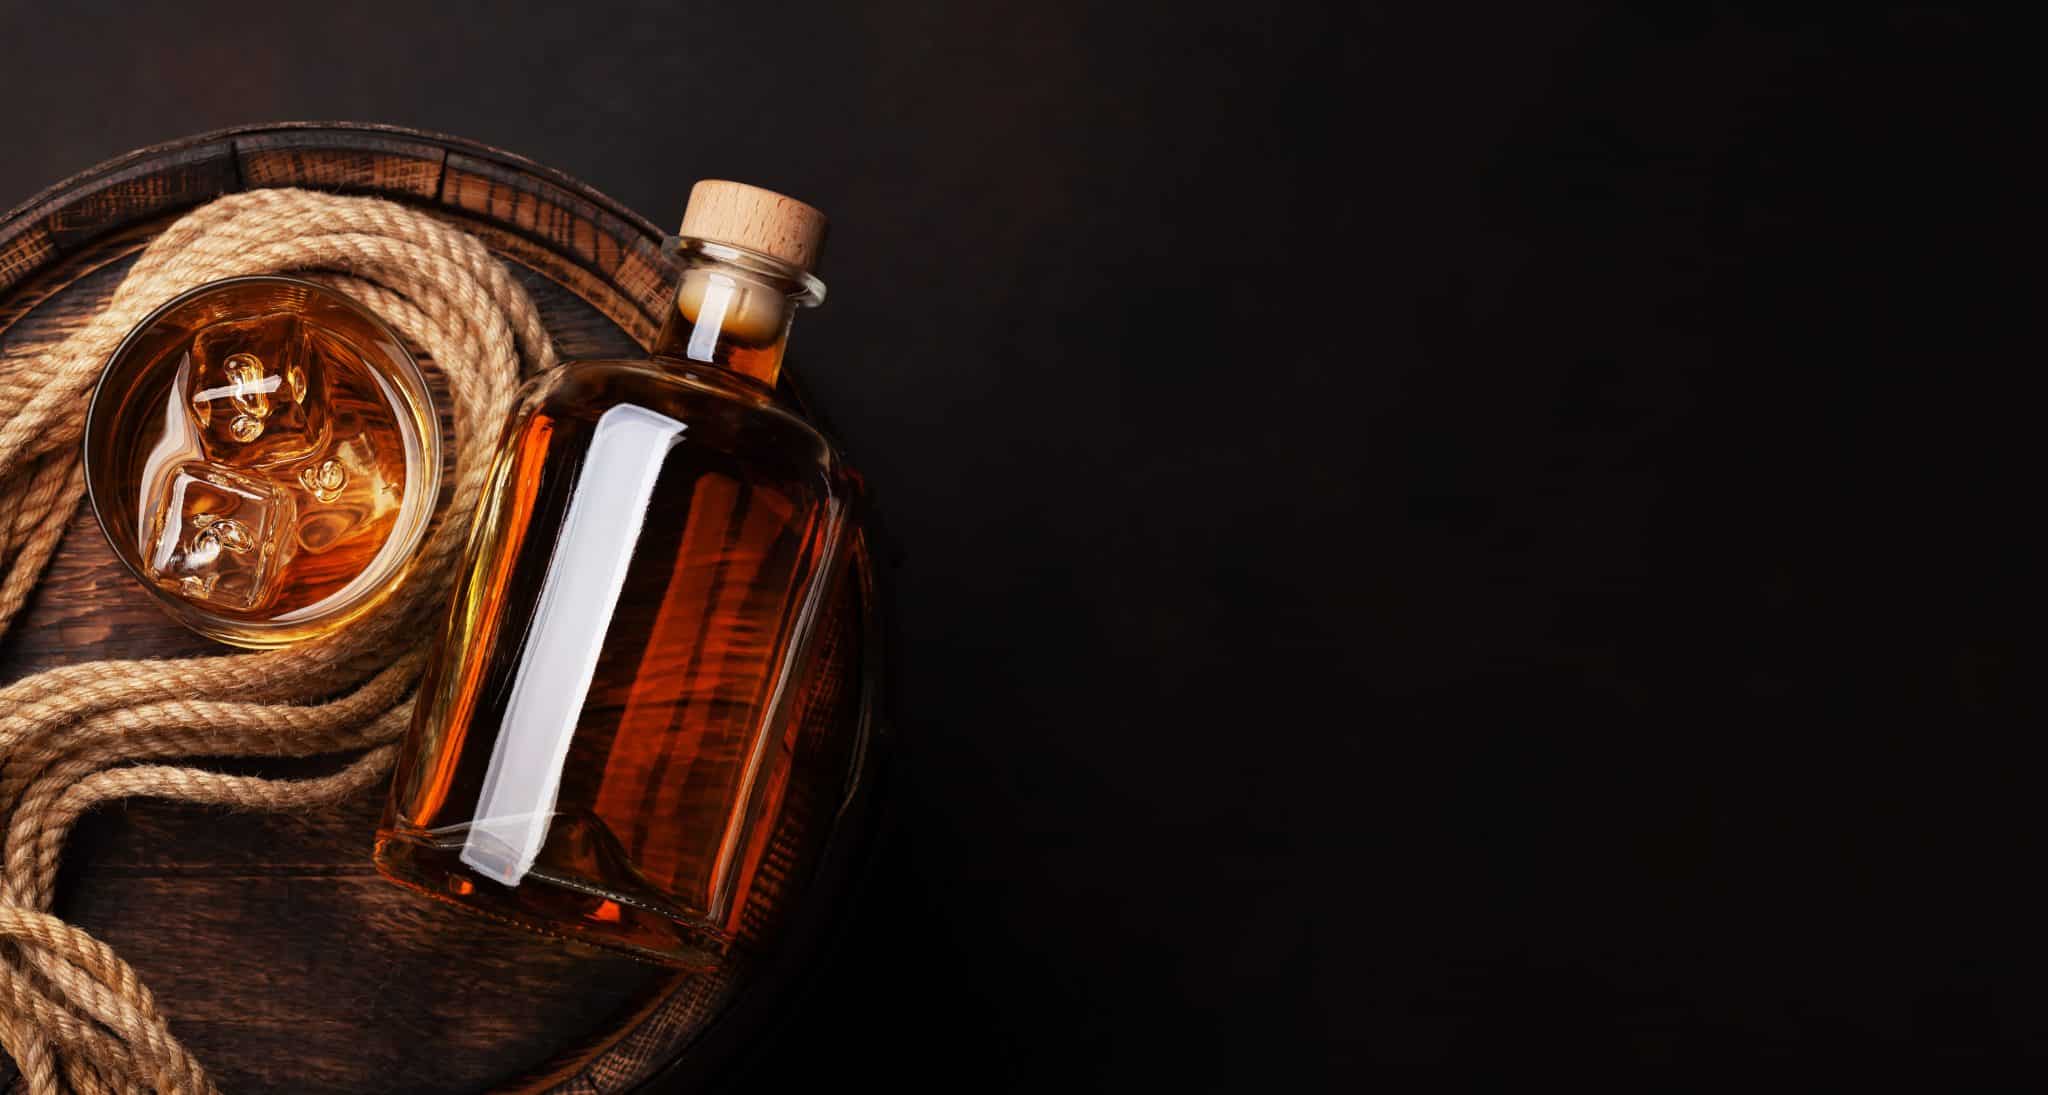 A glass of brandy with ice next to a bottle, on a wooden barrel with a rope, against a dark background.